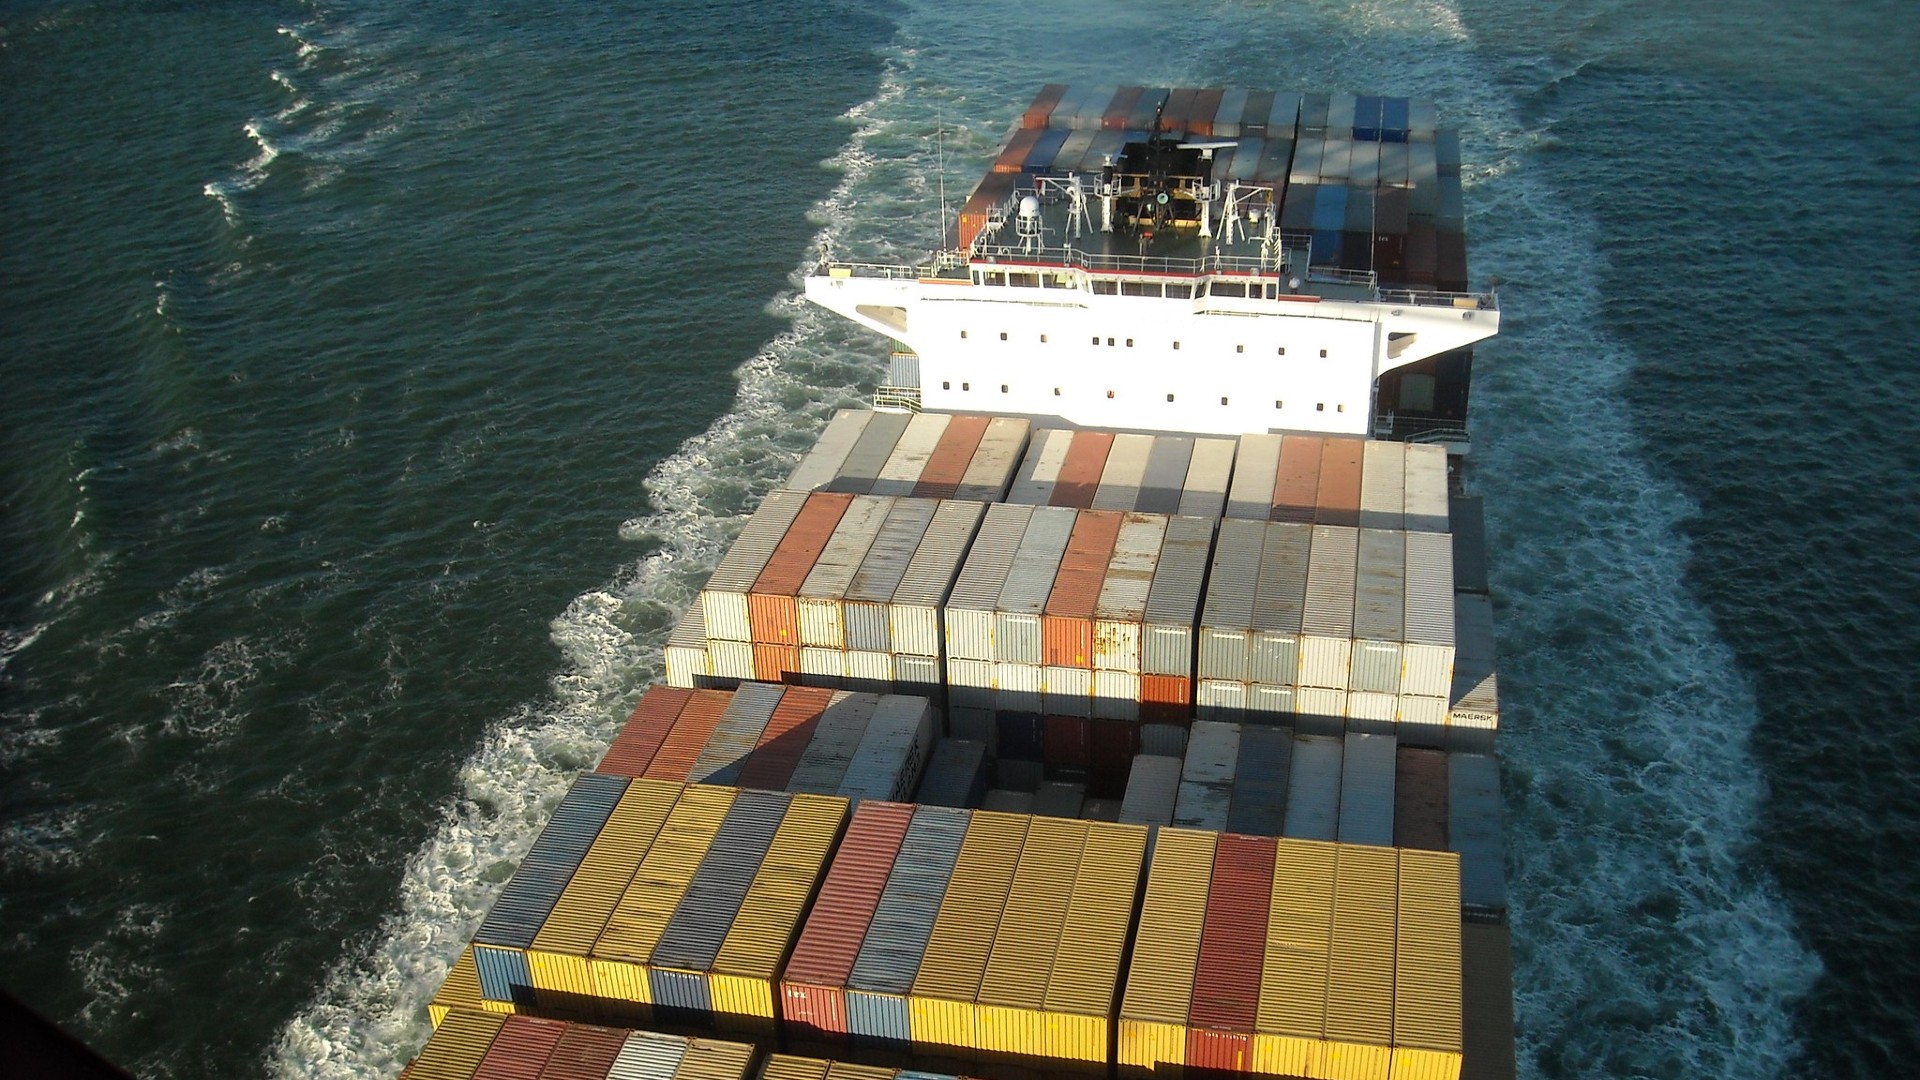 3,000 Shipping Containers Fell Into the Pacific Ocean Last Winter